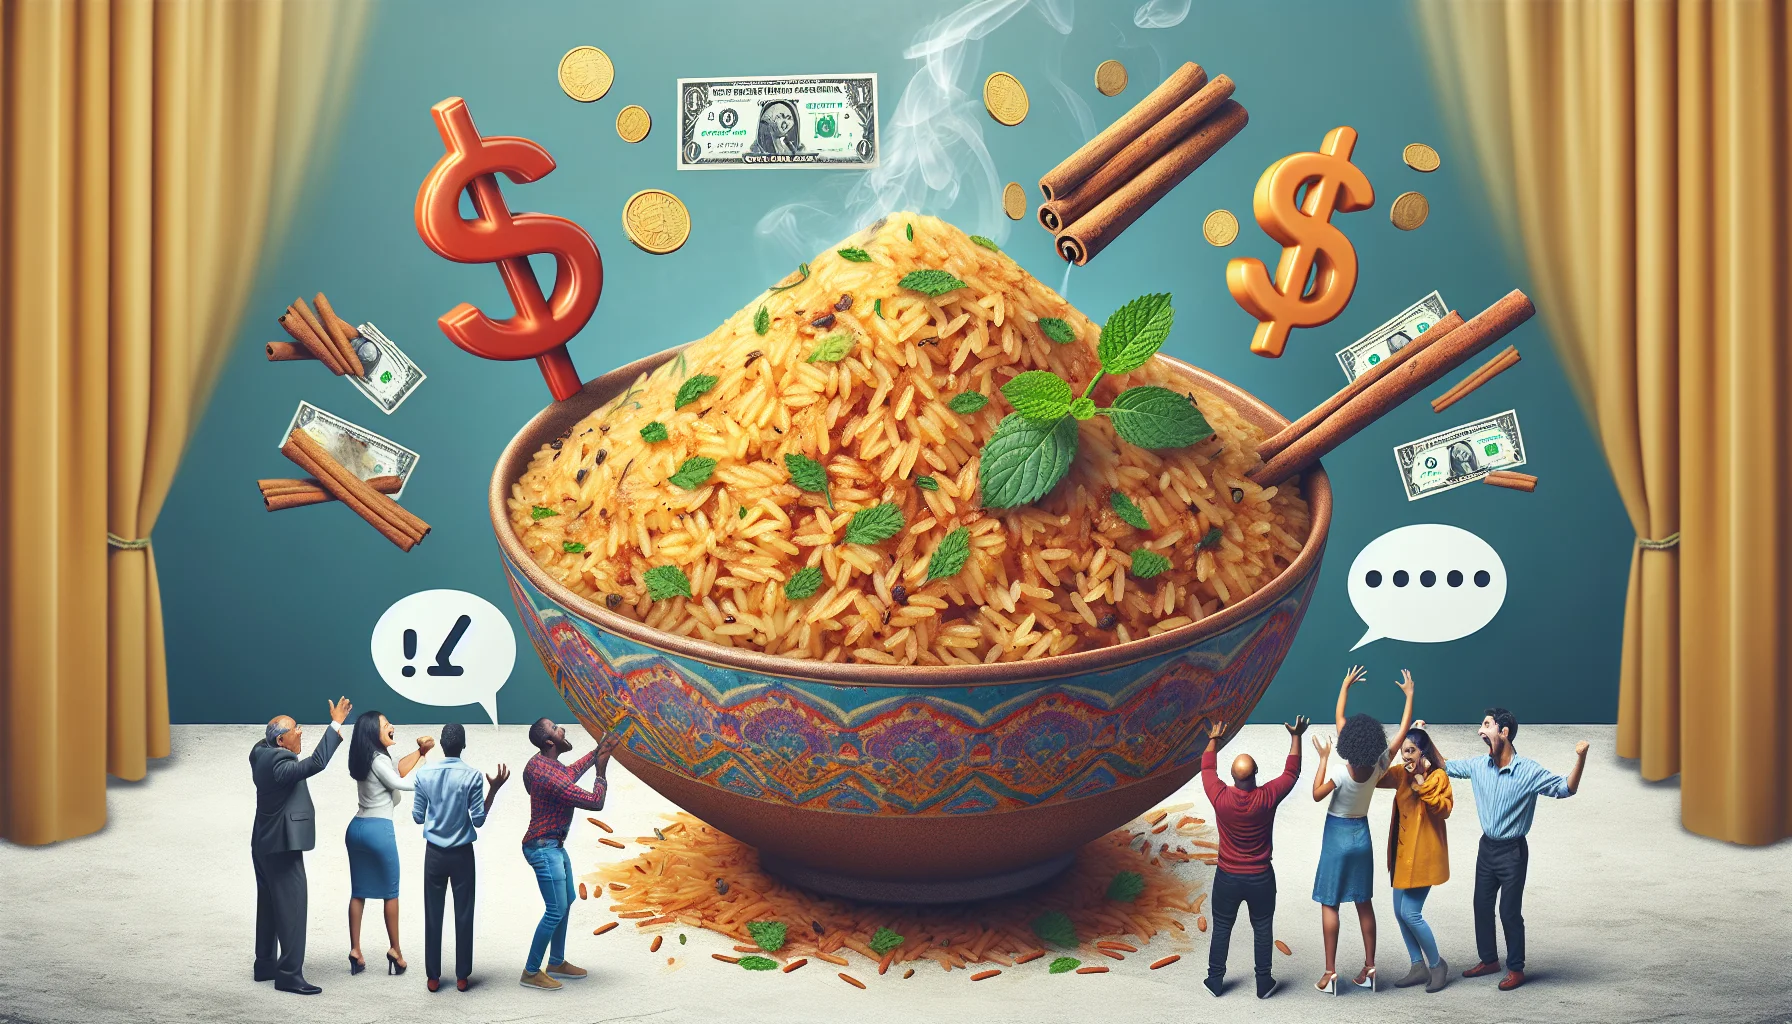 Create a visually engaging and amusing scenario where a huge bowl of savory cinnamon rice is centre-stage. The steaming, perfectly cooked, golden-brown rice is glistening with fresh herbs scattered on top. It's surrounded by cost-saving symbols and dollar notes with a downward arrow, signifying the affordability of the dish. A diverse group of people, including a South Asian woman and a Middle-Eastern man, are eagerly reaching for the bowl, their faces lit up with anticipation. Floating speech bubbles over them are filled with exclamations of the health benefits and cost-effectiveness of the dish, adding a humorous touch.